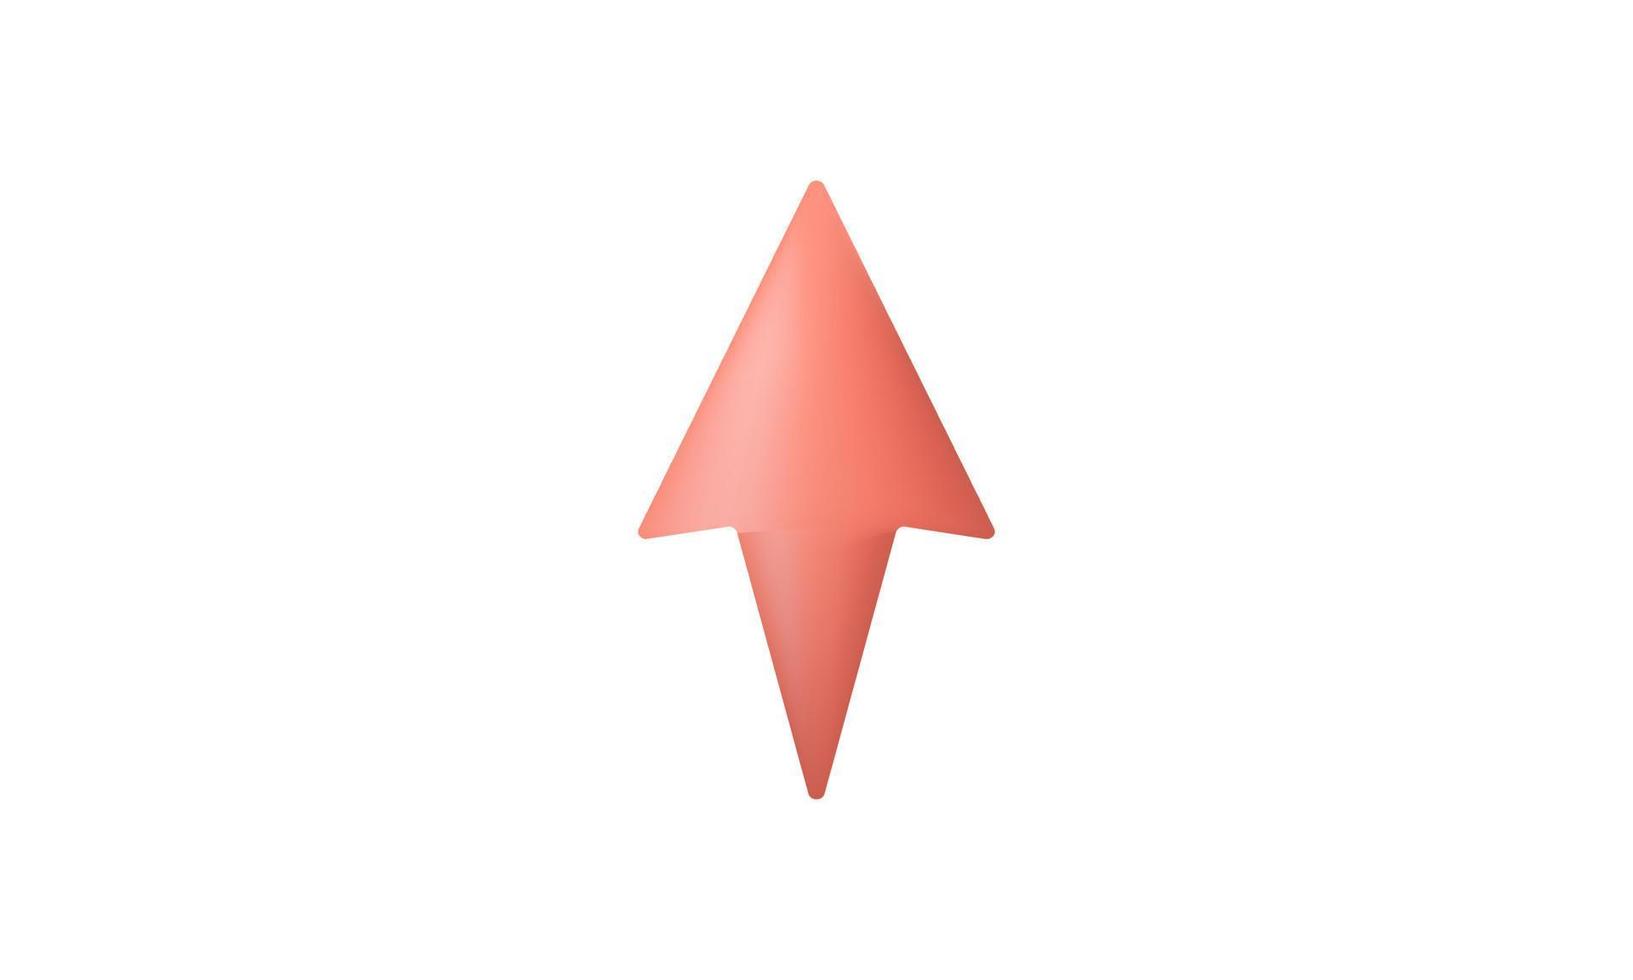 illustration arrow cursor computer pointer realistic 3d creative isolated on background vector